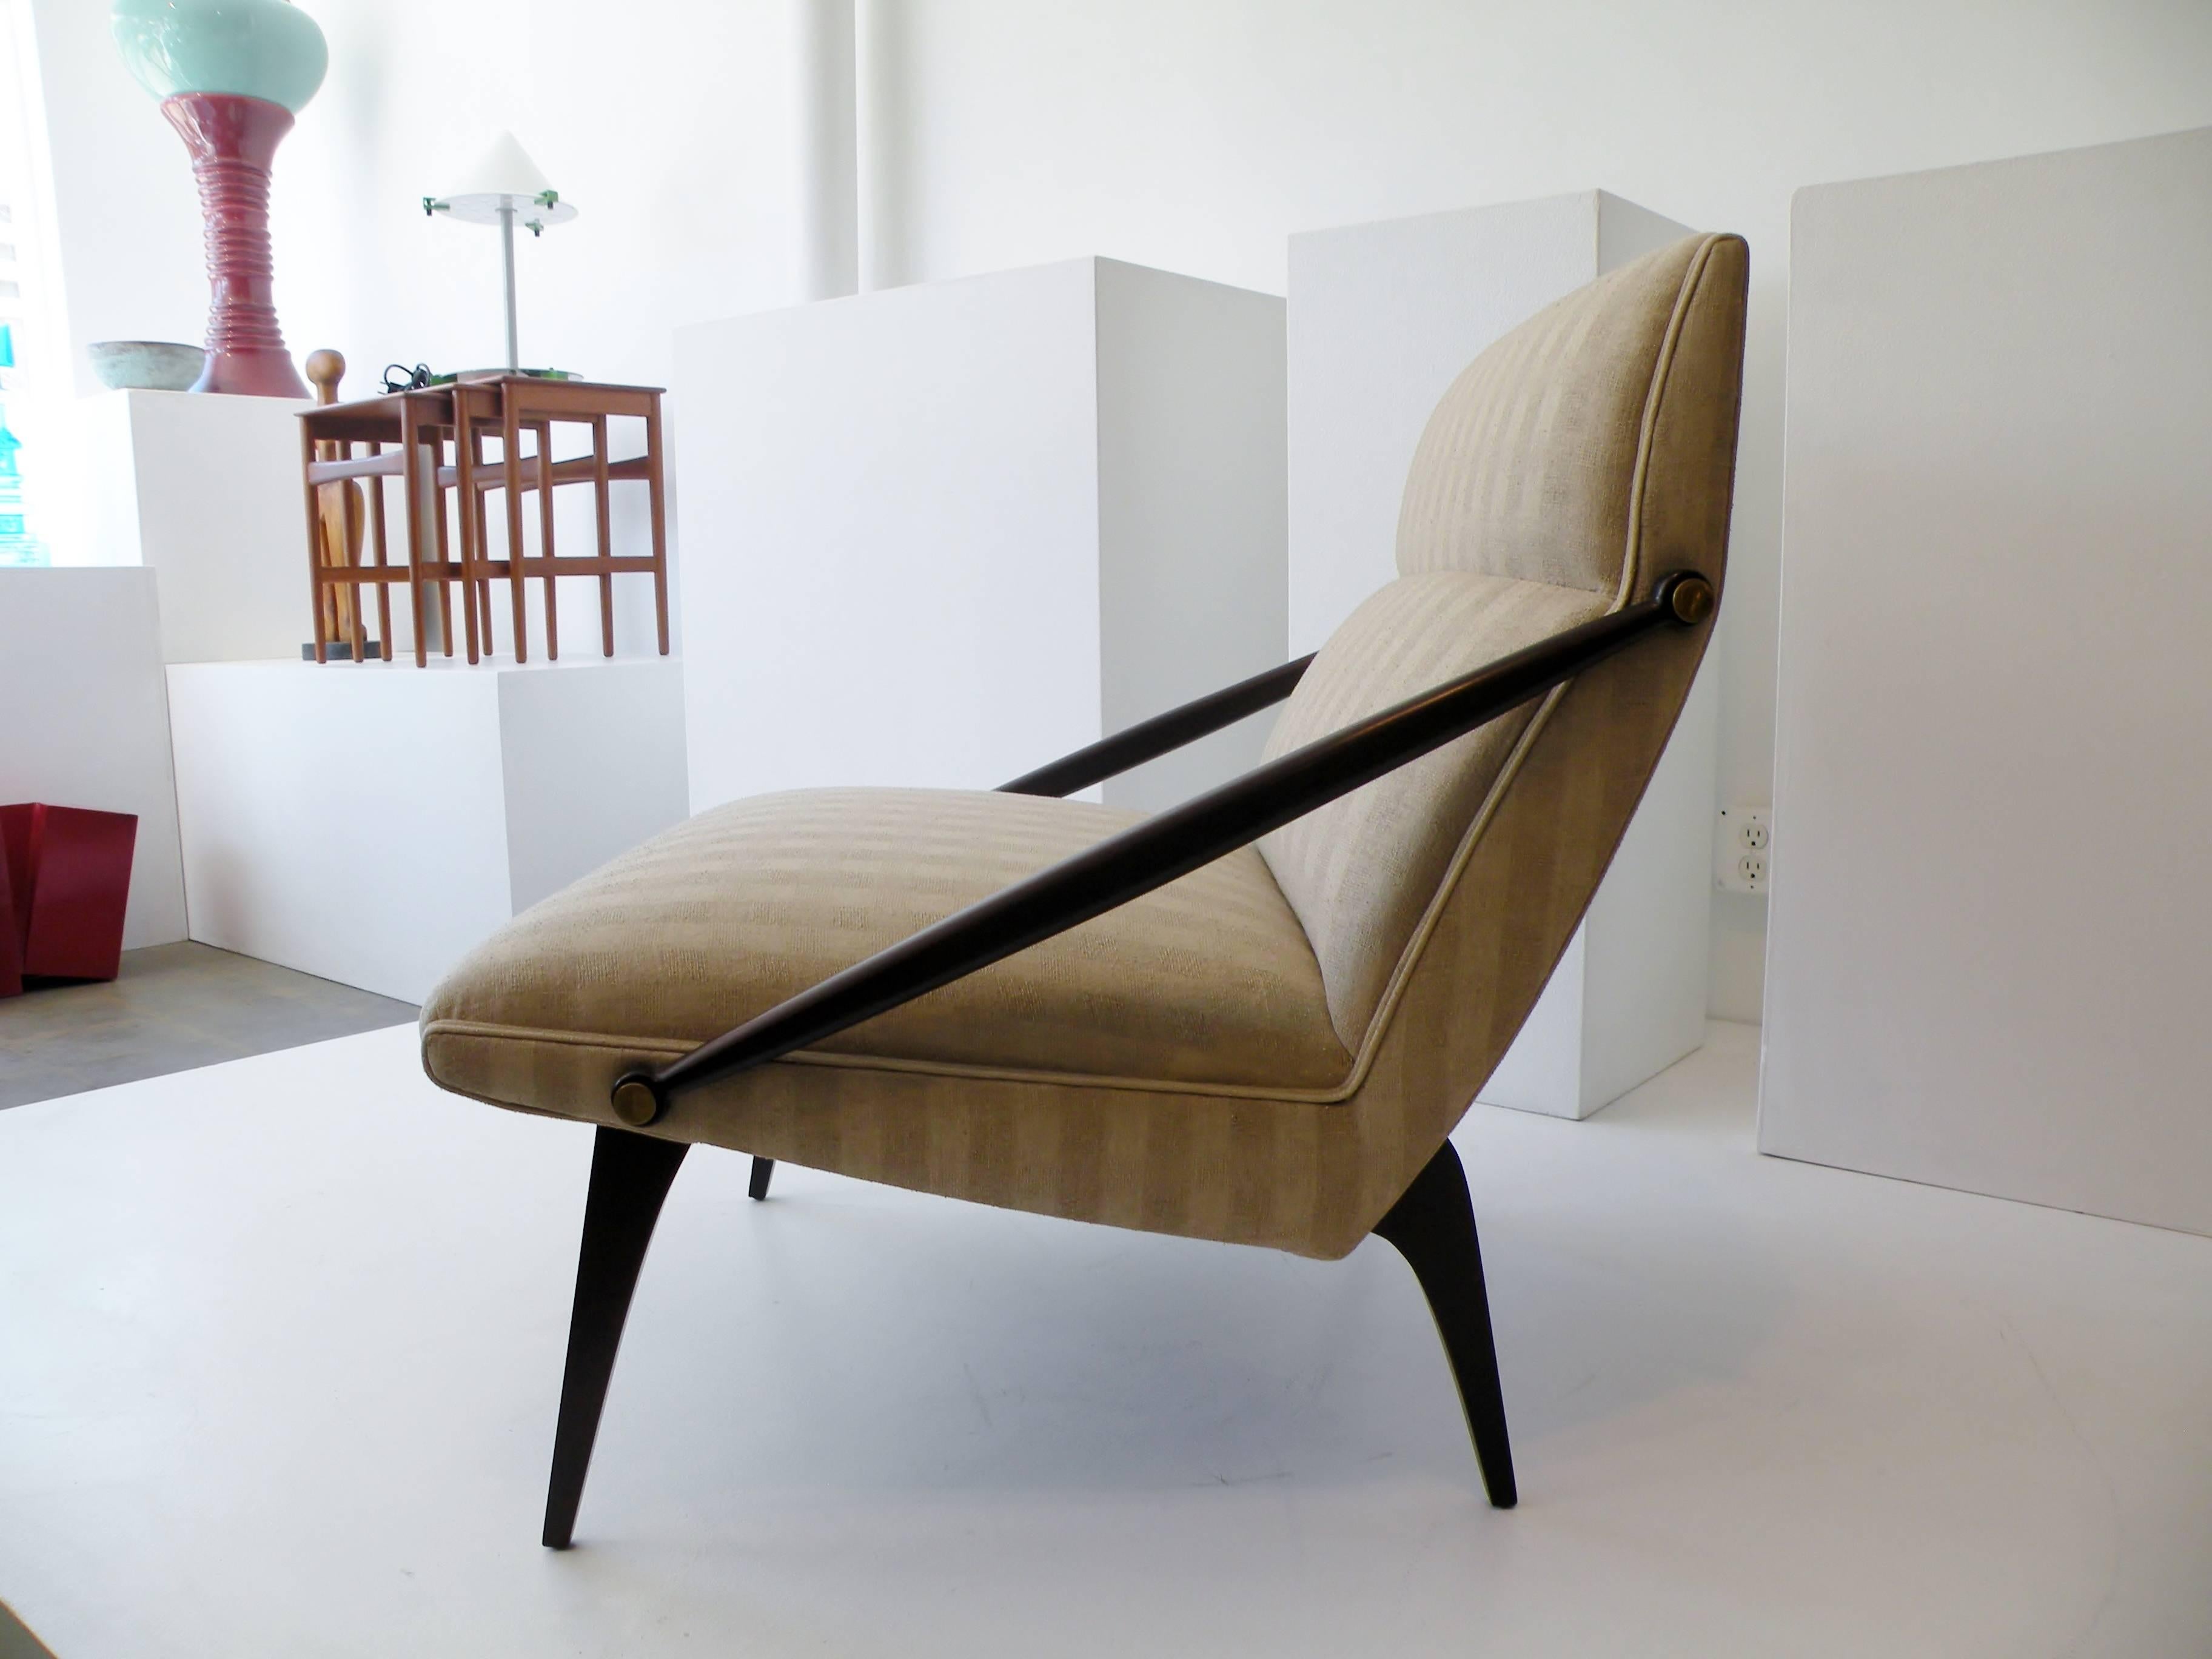 An elegant and rare Italian lounge chair. Sculptural cantilevered form often attributed as a design by architect Gio Ponti. This lounge chair manufactured by M. Singer and Sons, restored and newly reupholstered with backed silk.